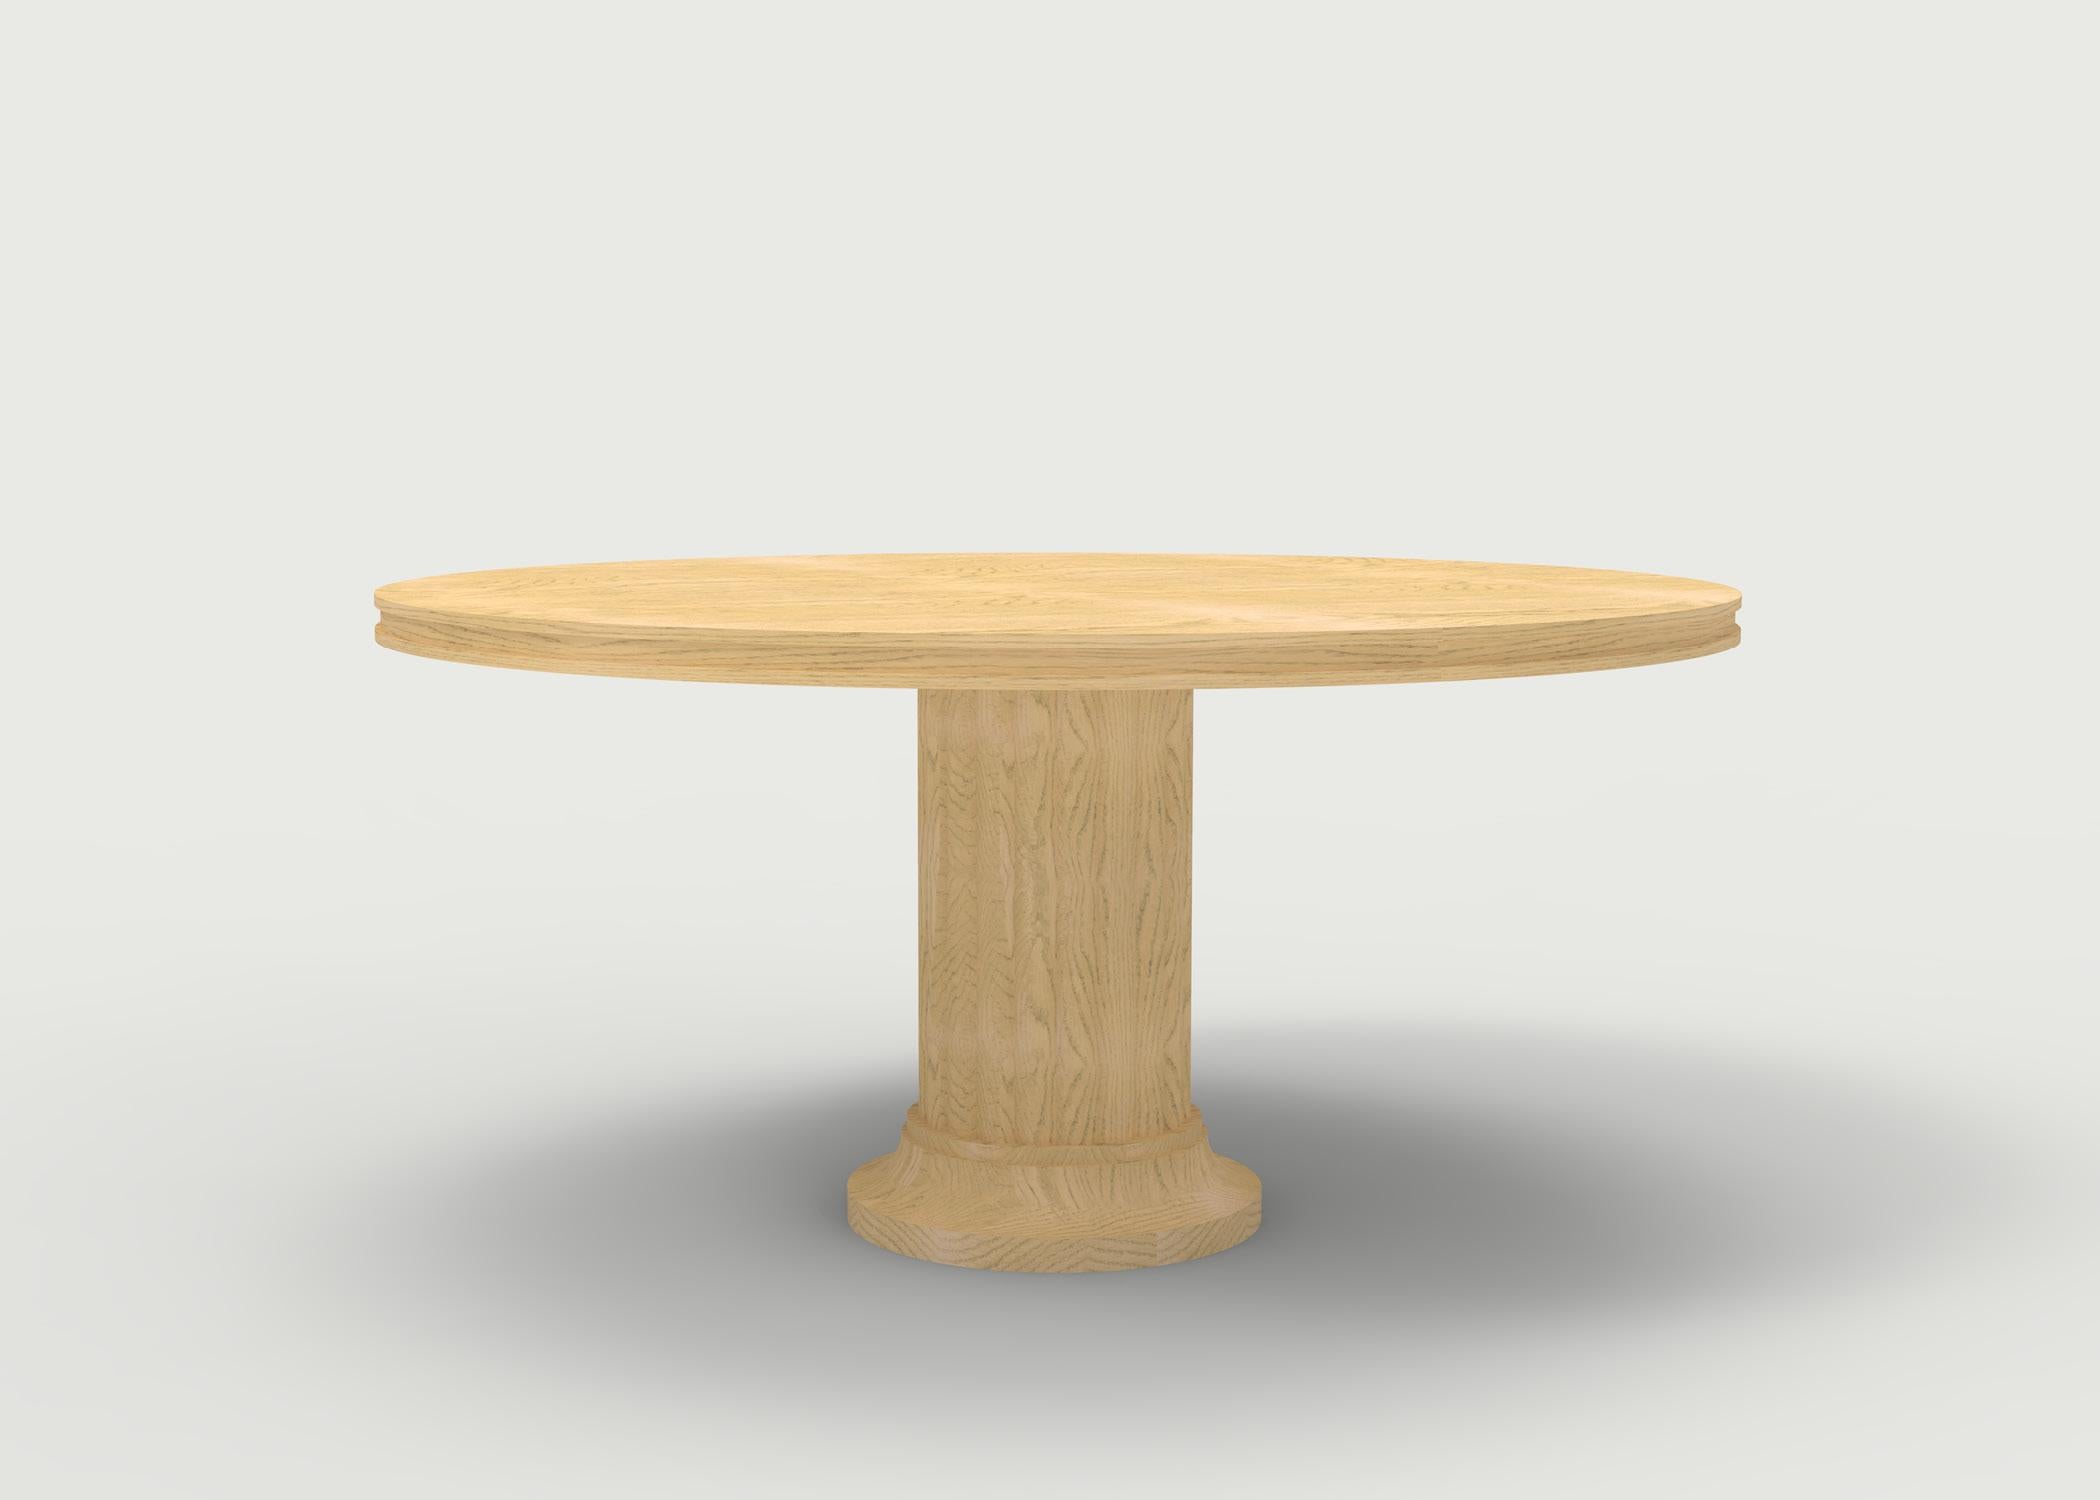 The Harmon dining table is an elegant and styled piece - it can be used in both a dining room or conference room. Wood top and base with Classic detailing and smartly finished in natural wood tone.

Price is for table in primary photo in standard